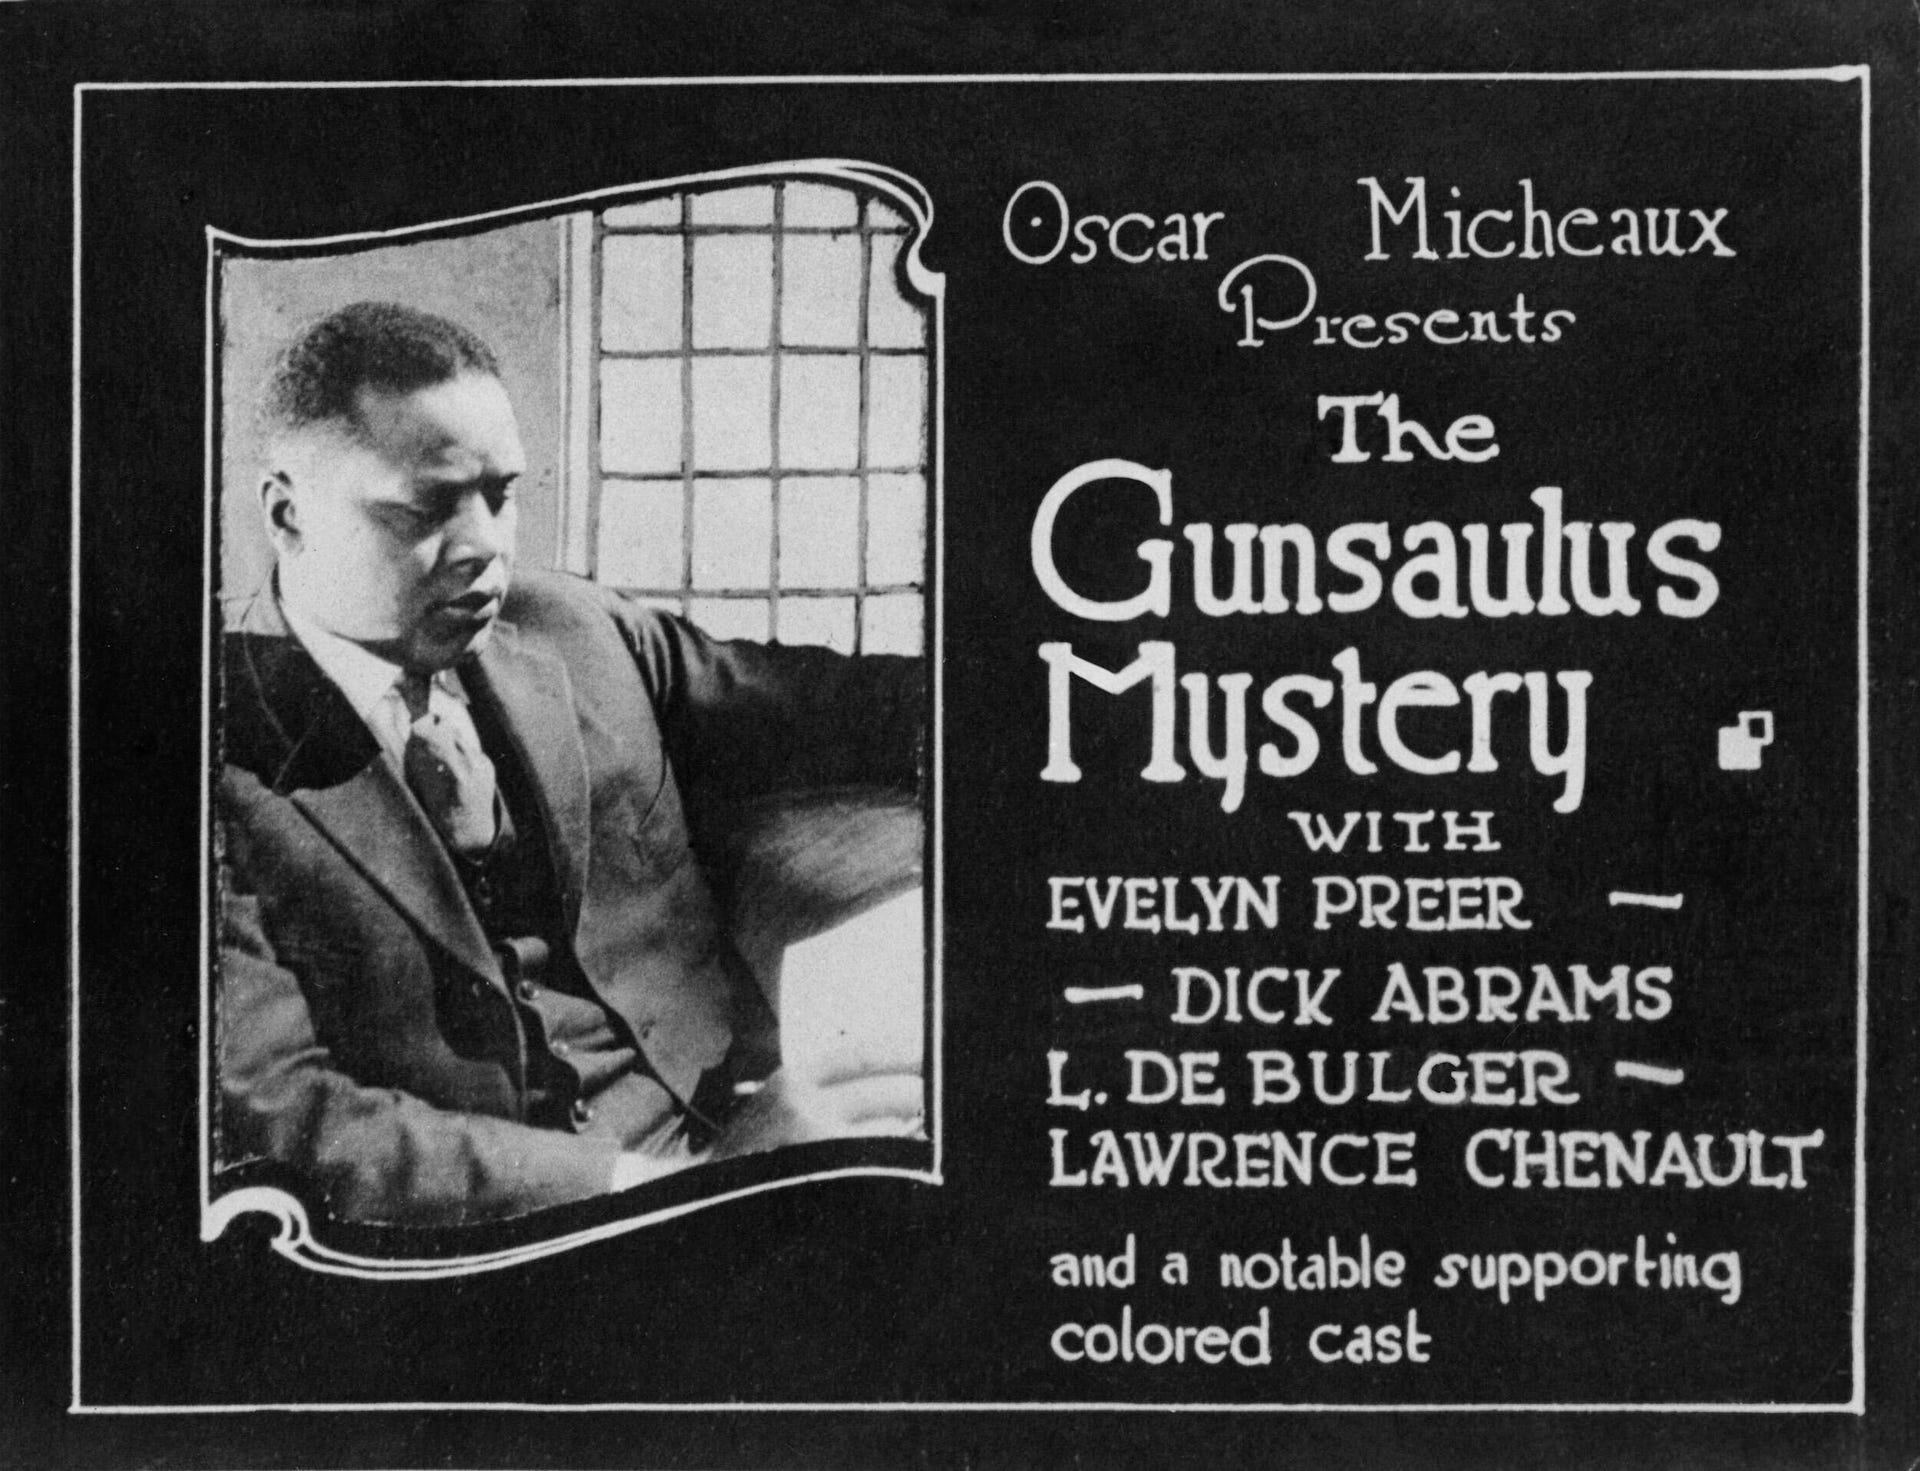 micheaux-poster-gunsaulus-mystery-gettyimages-539289138